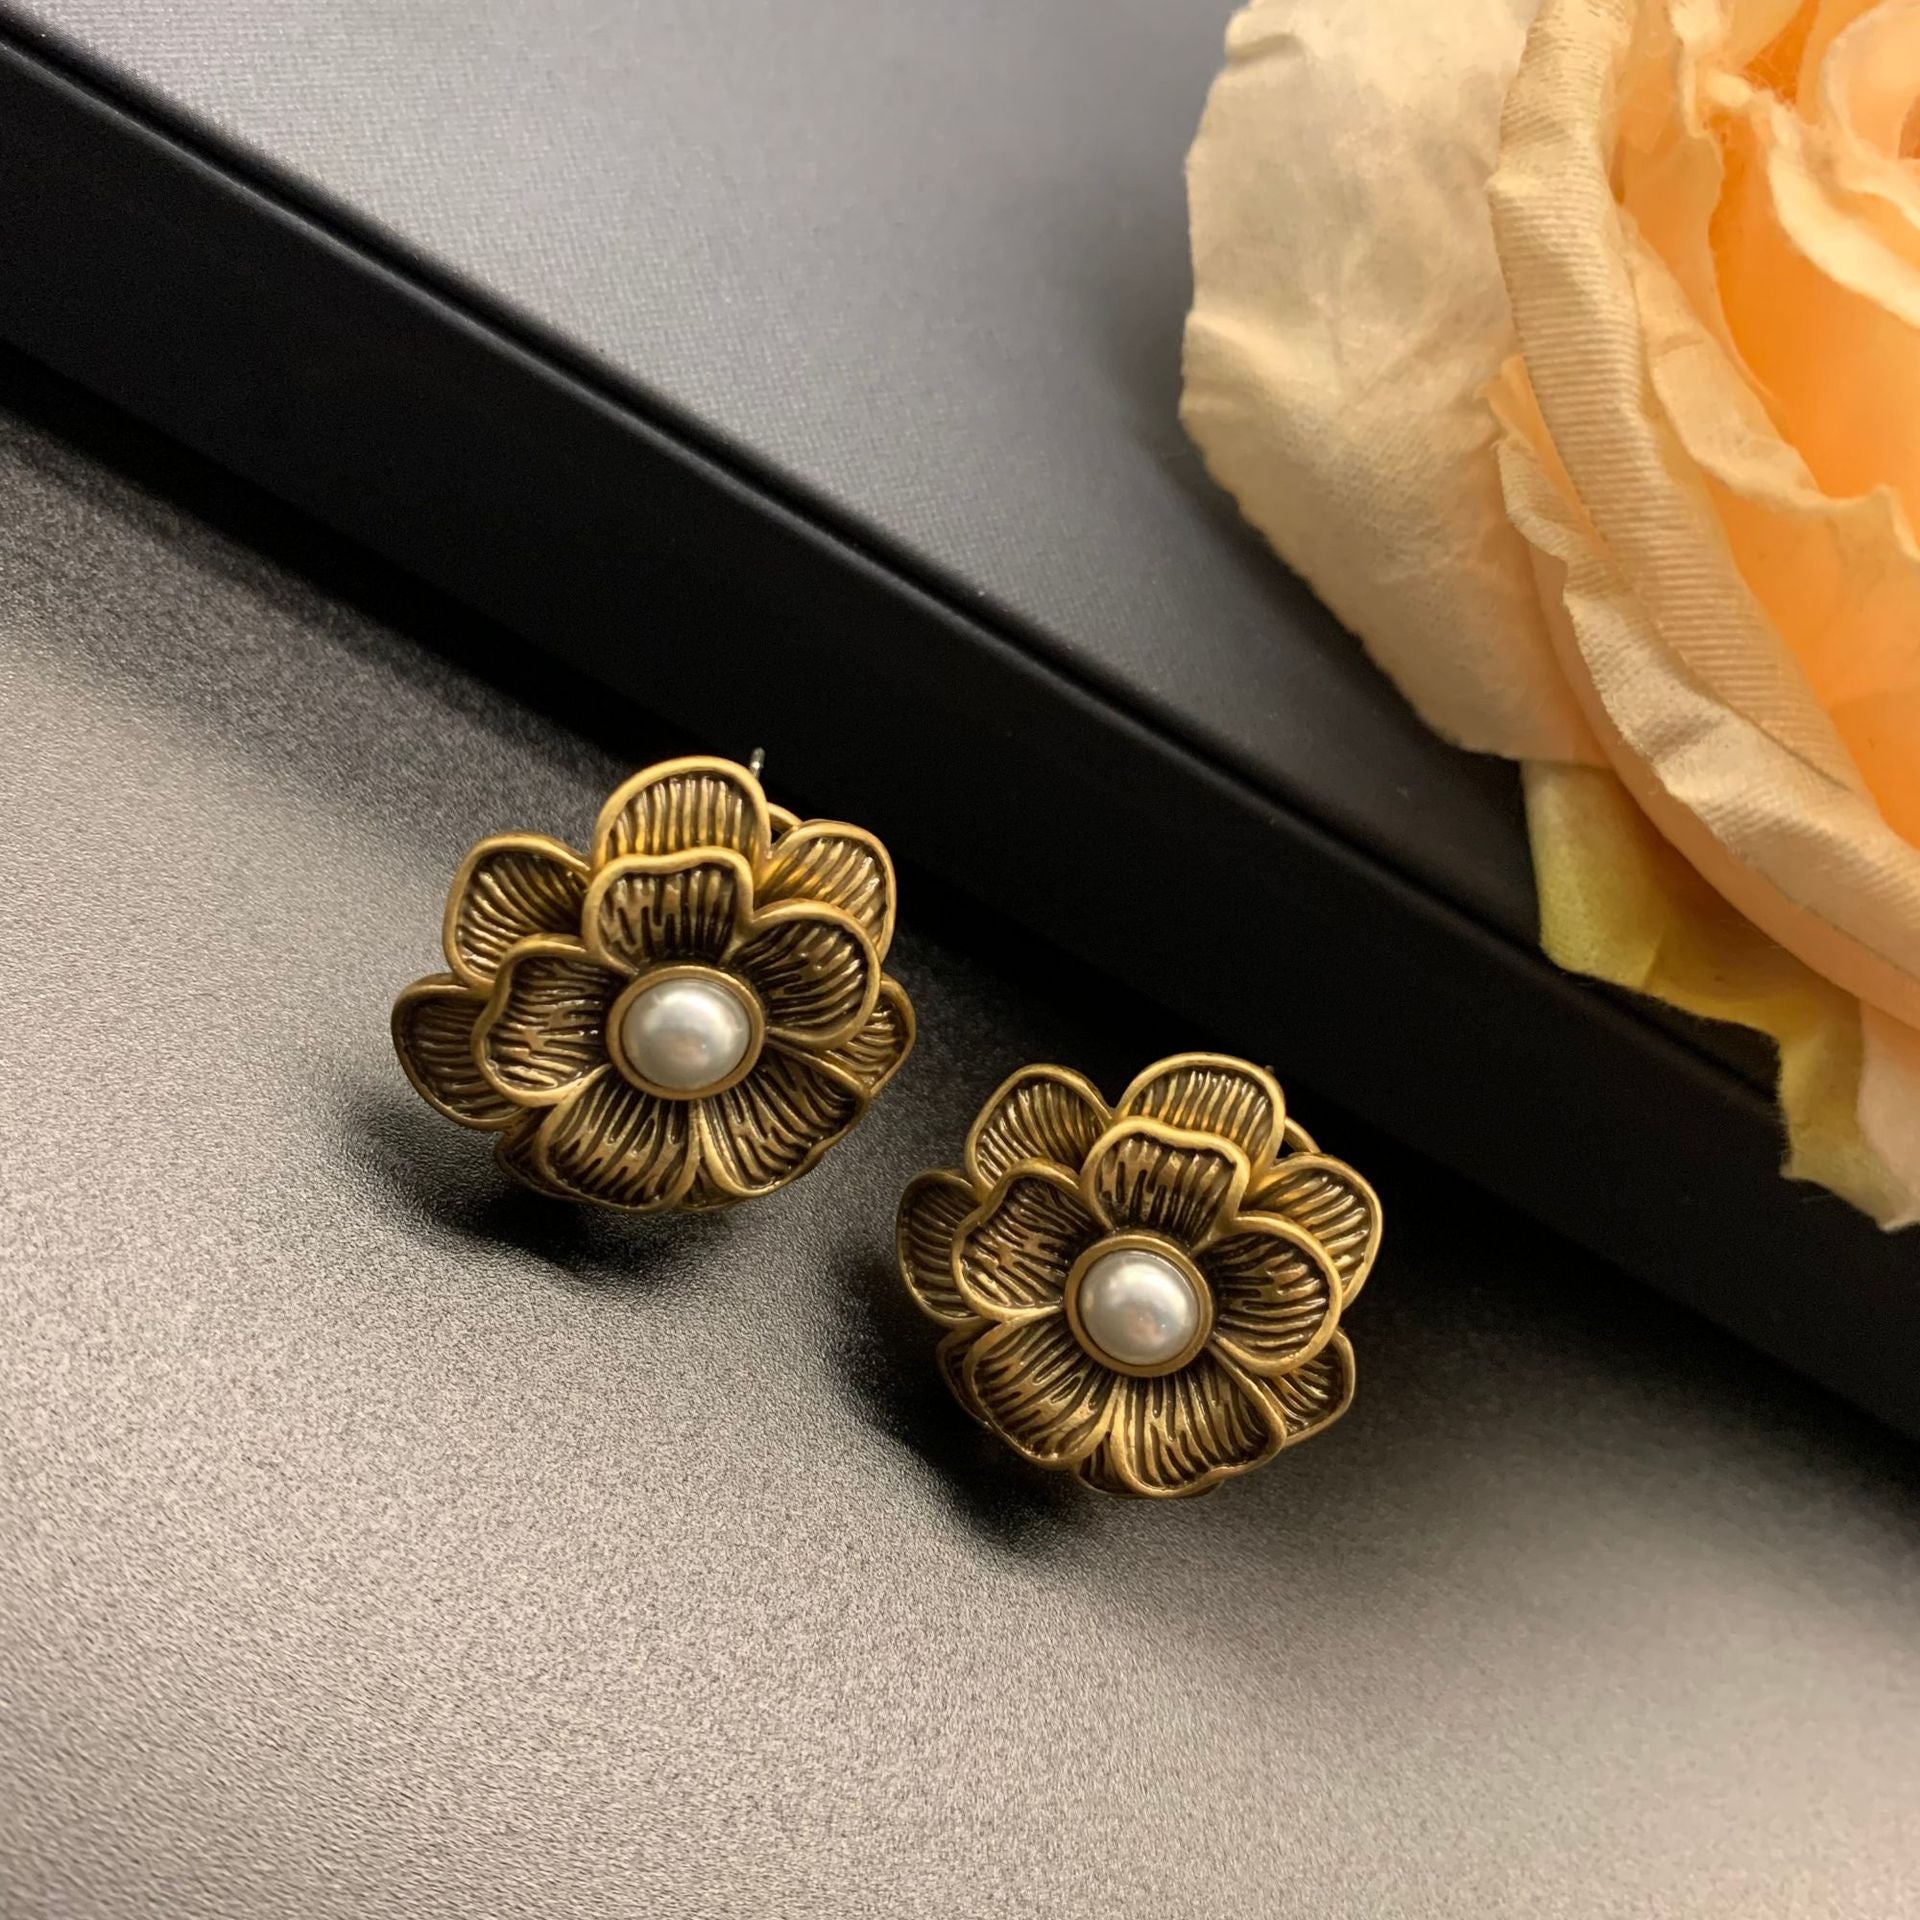 Vintage-Inspired Pure Copper Floral Earrings  UponBasics   